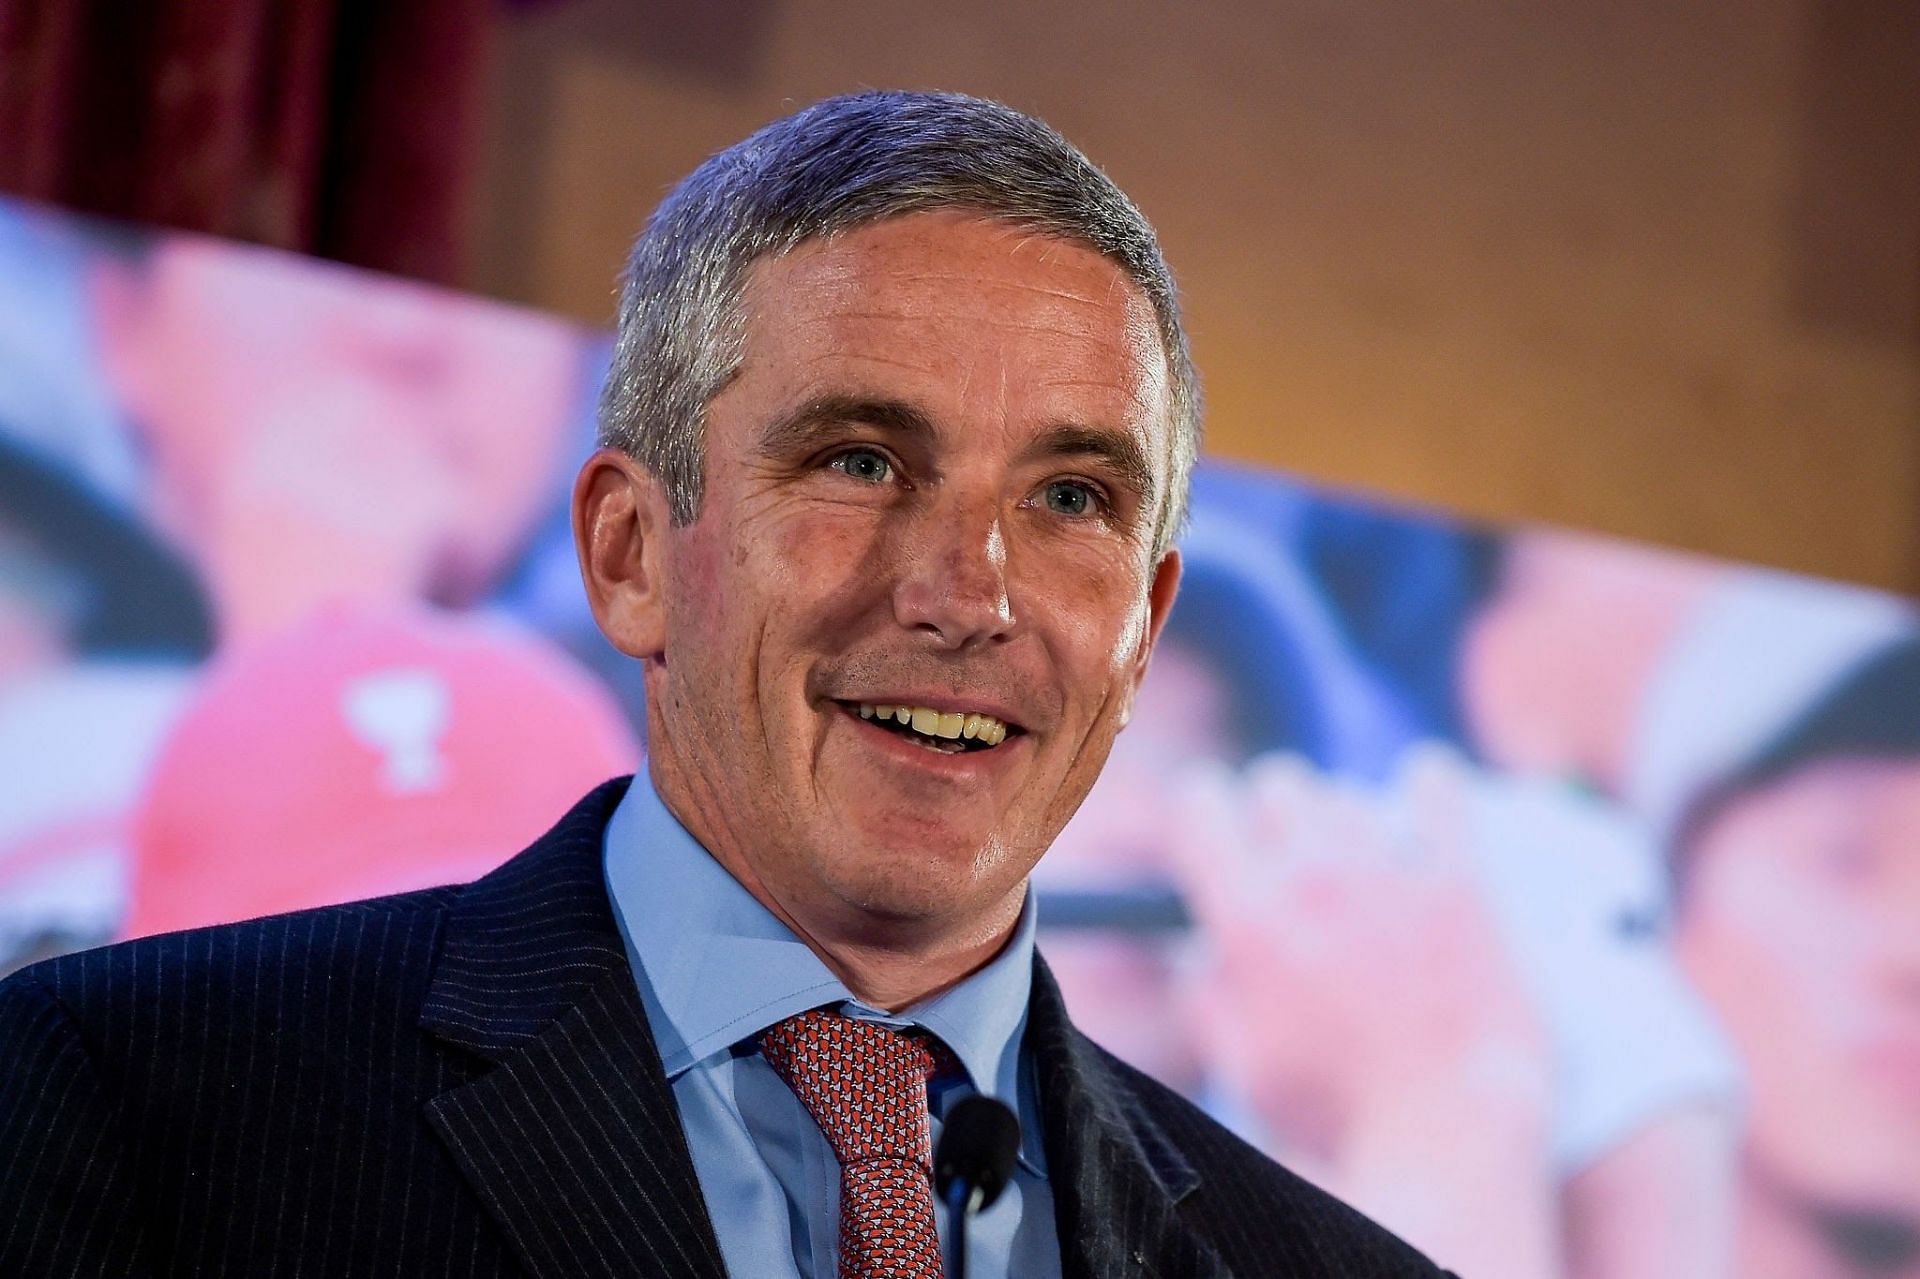 PGA Tour Commissioner Jay Monahan said all members will benefit from the changes